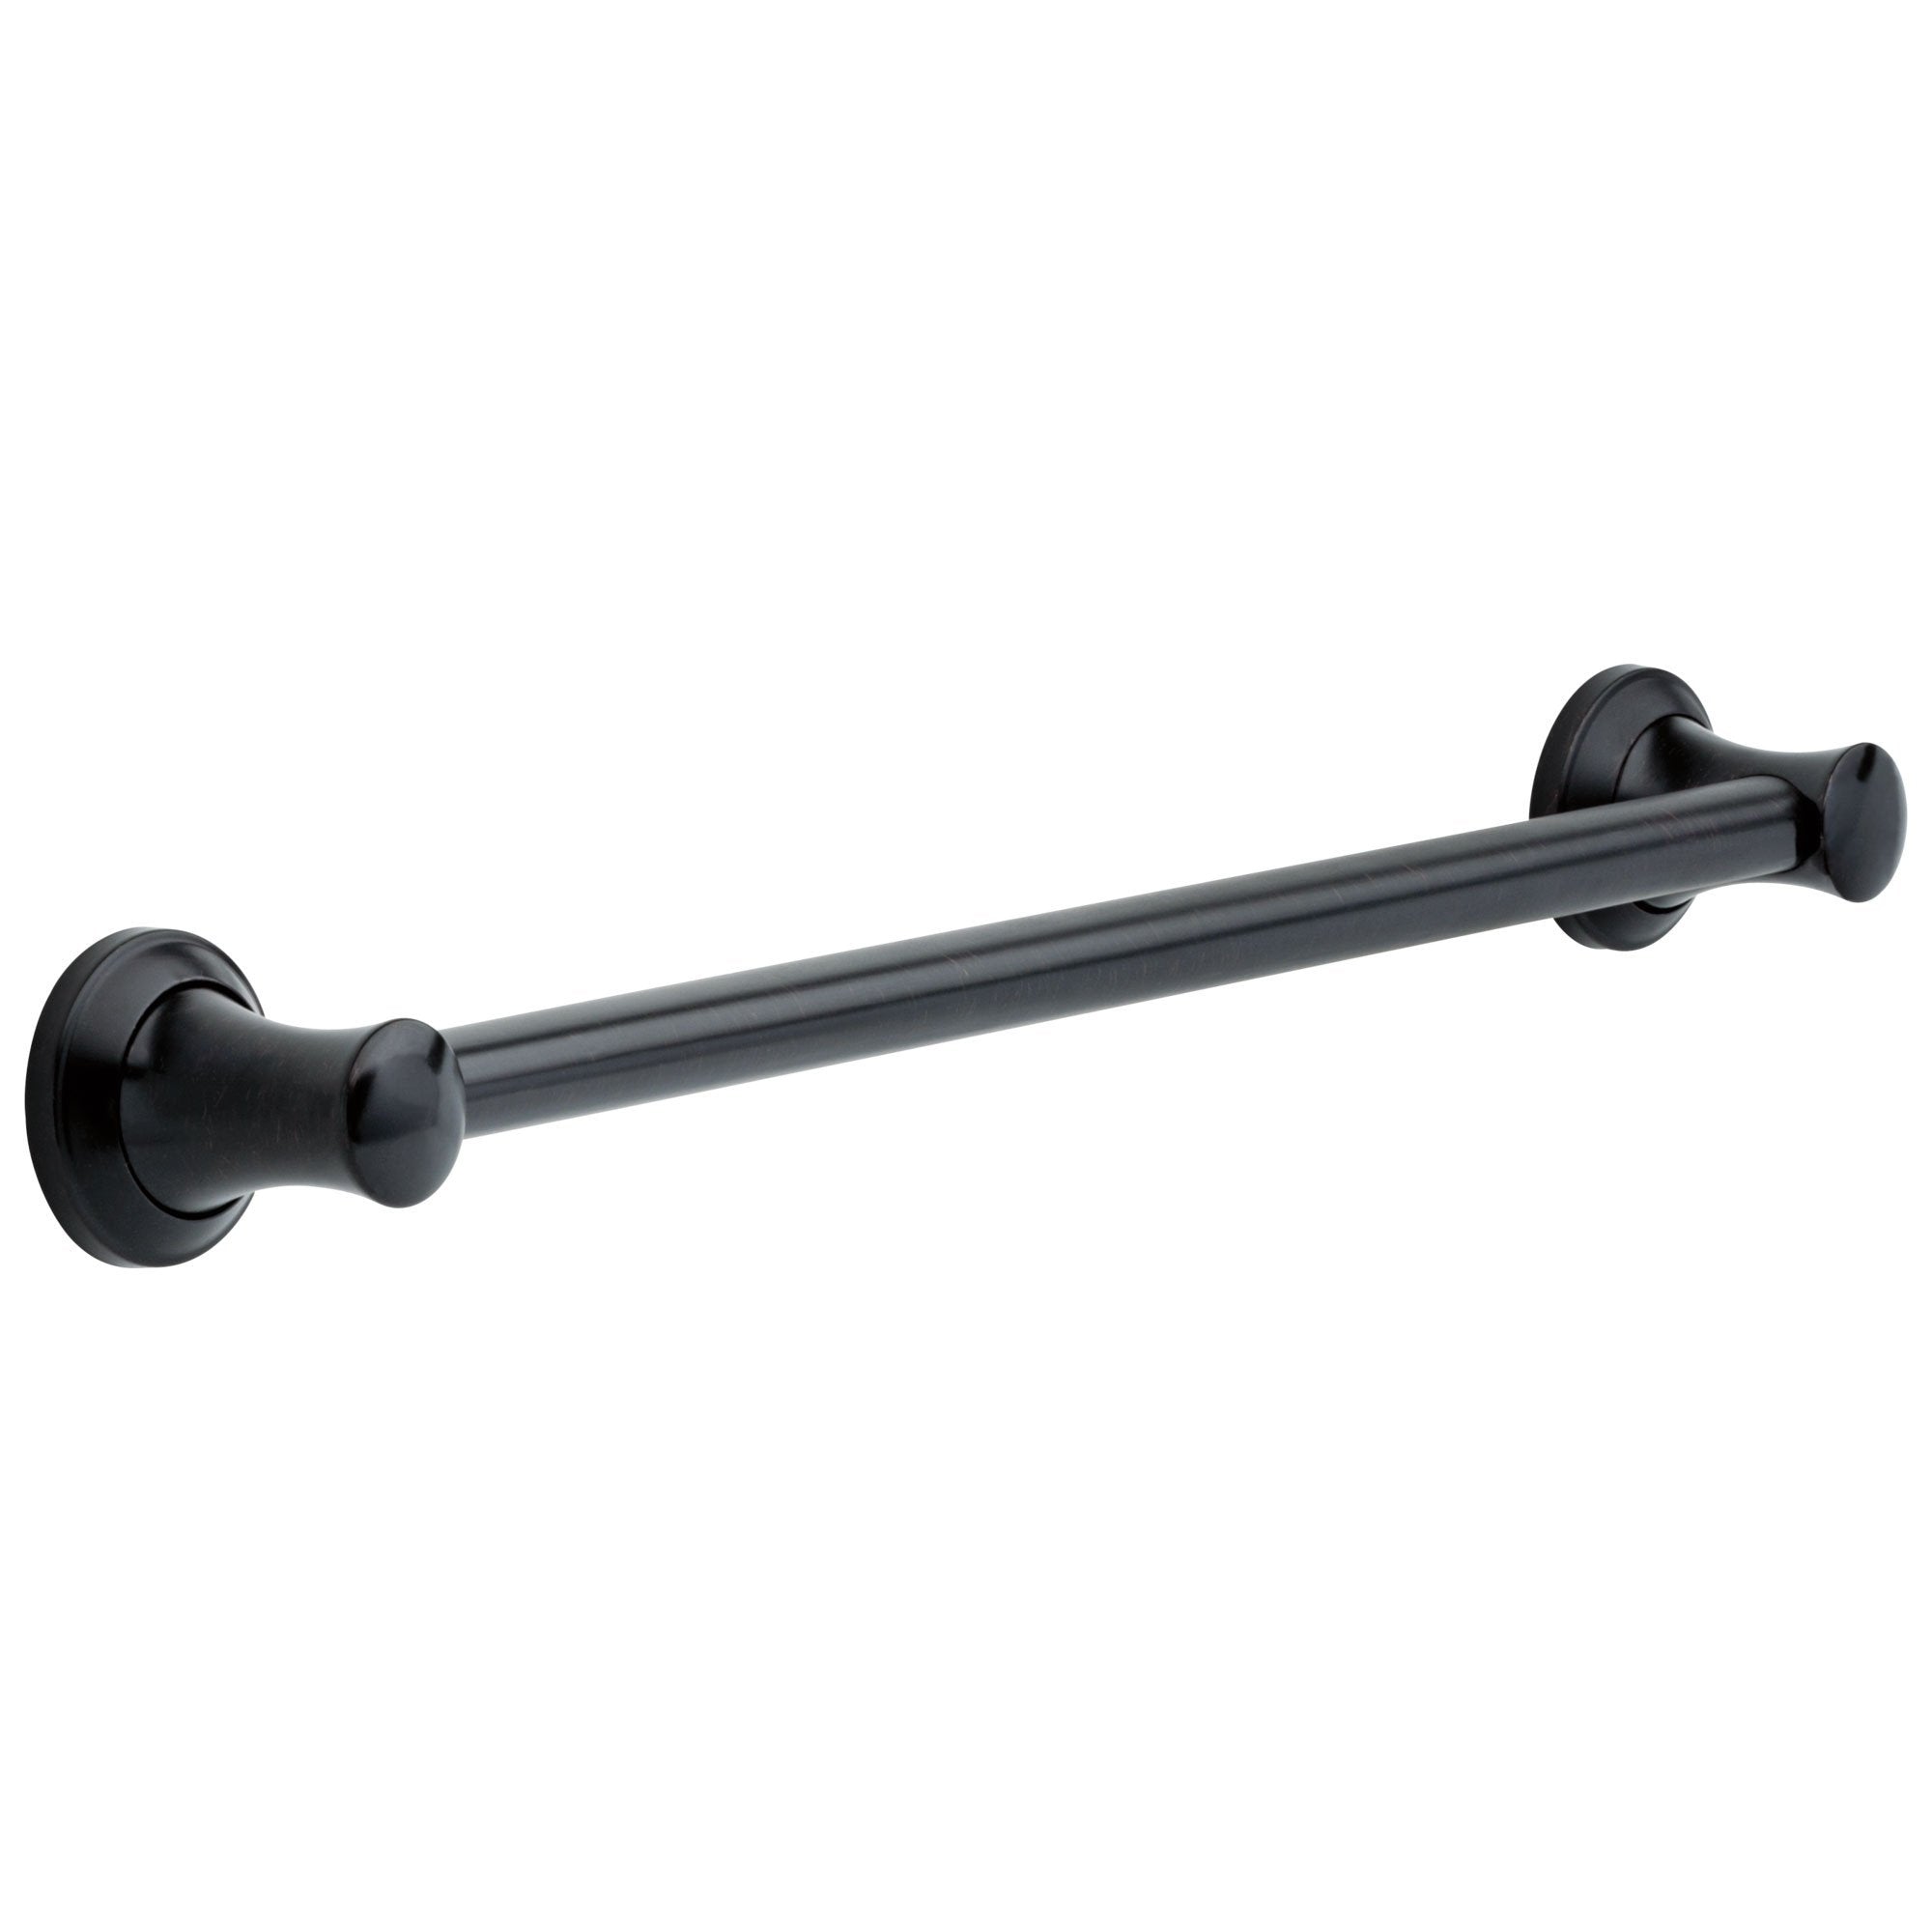 Delta Bath Safety Collection Venetian Bronze Finish Transitional Style Decorative ADA Approved 24" Grab Bar for Bathroom or Shower D41724RB